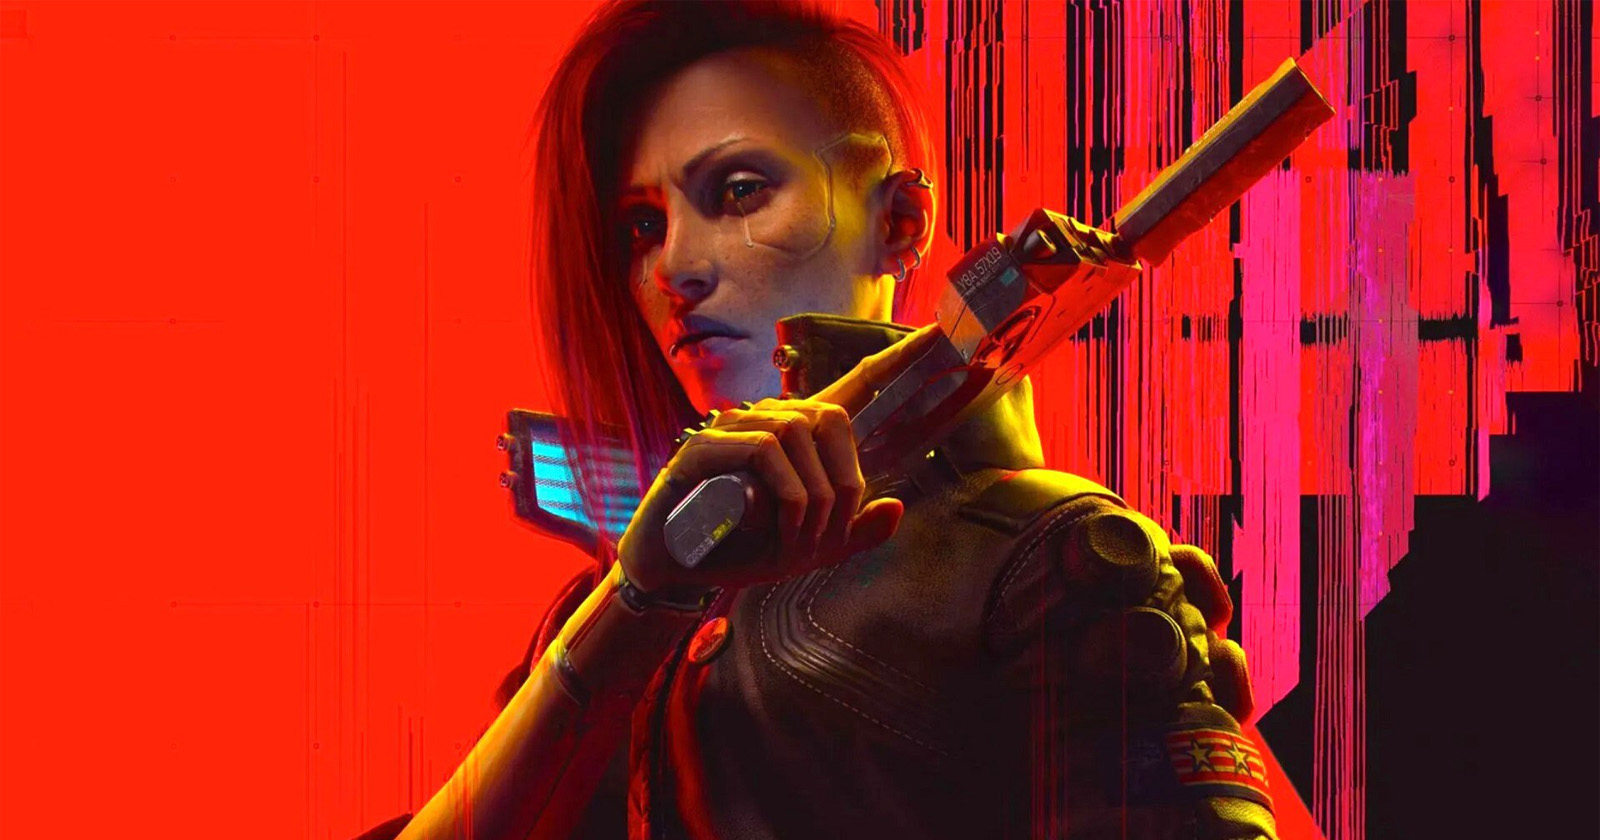 Cyberpunk 2077 is free for a short time!